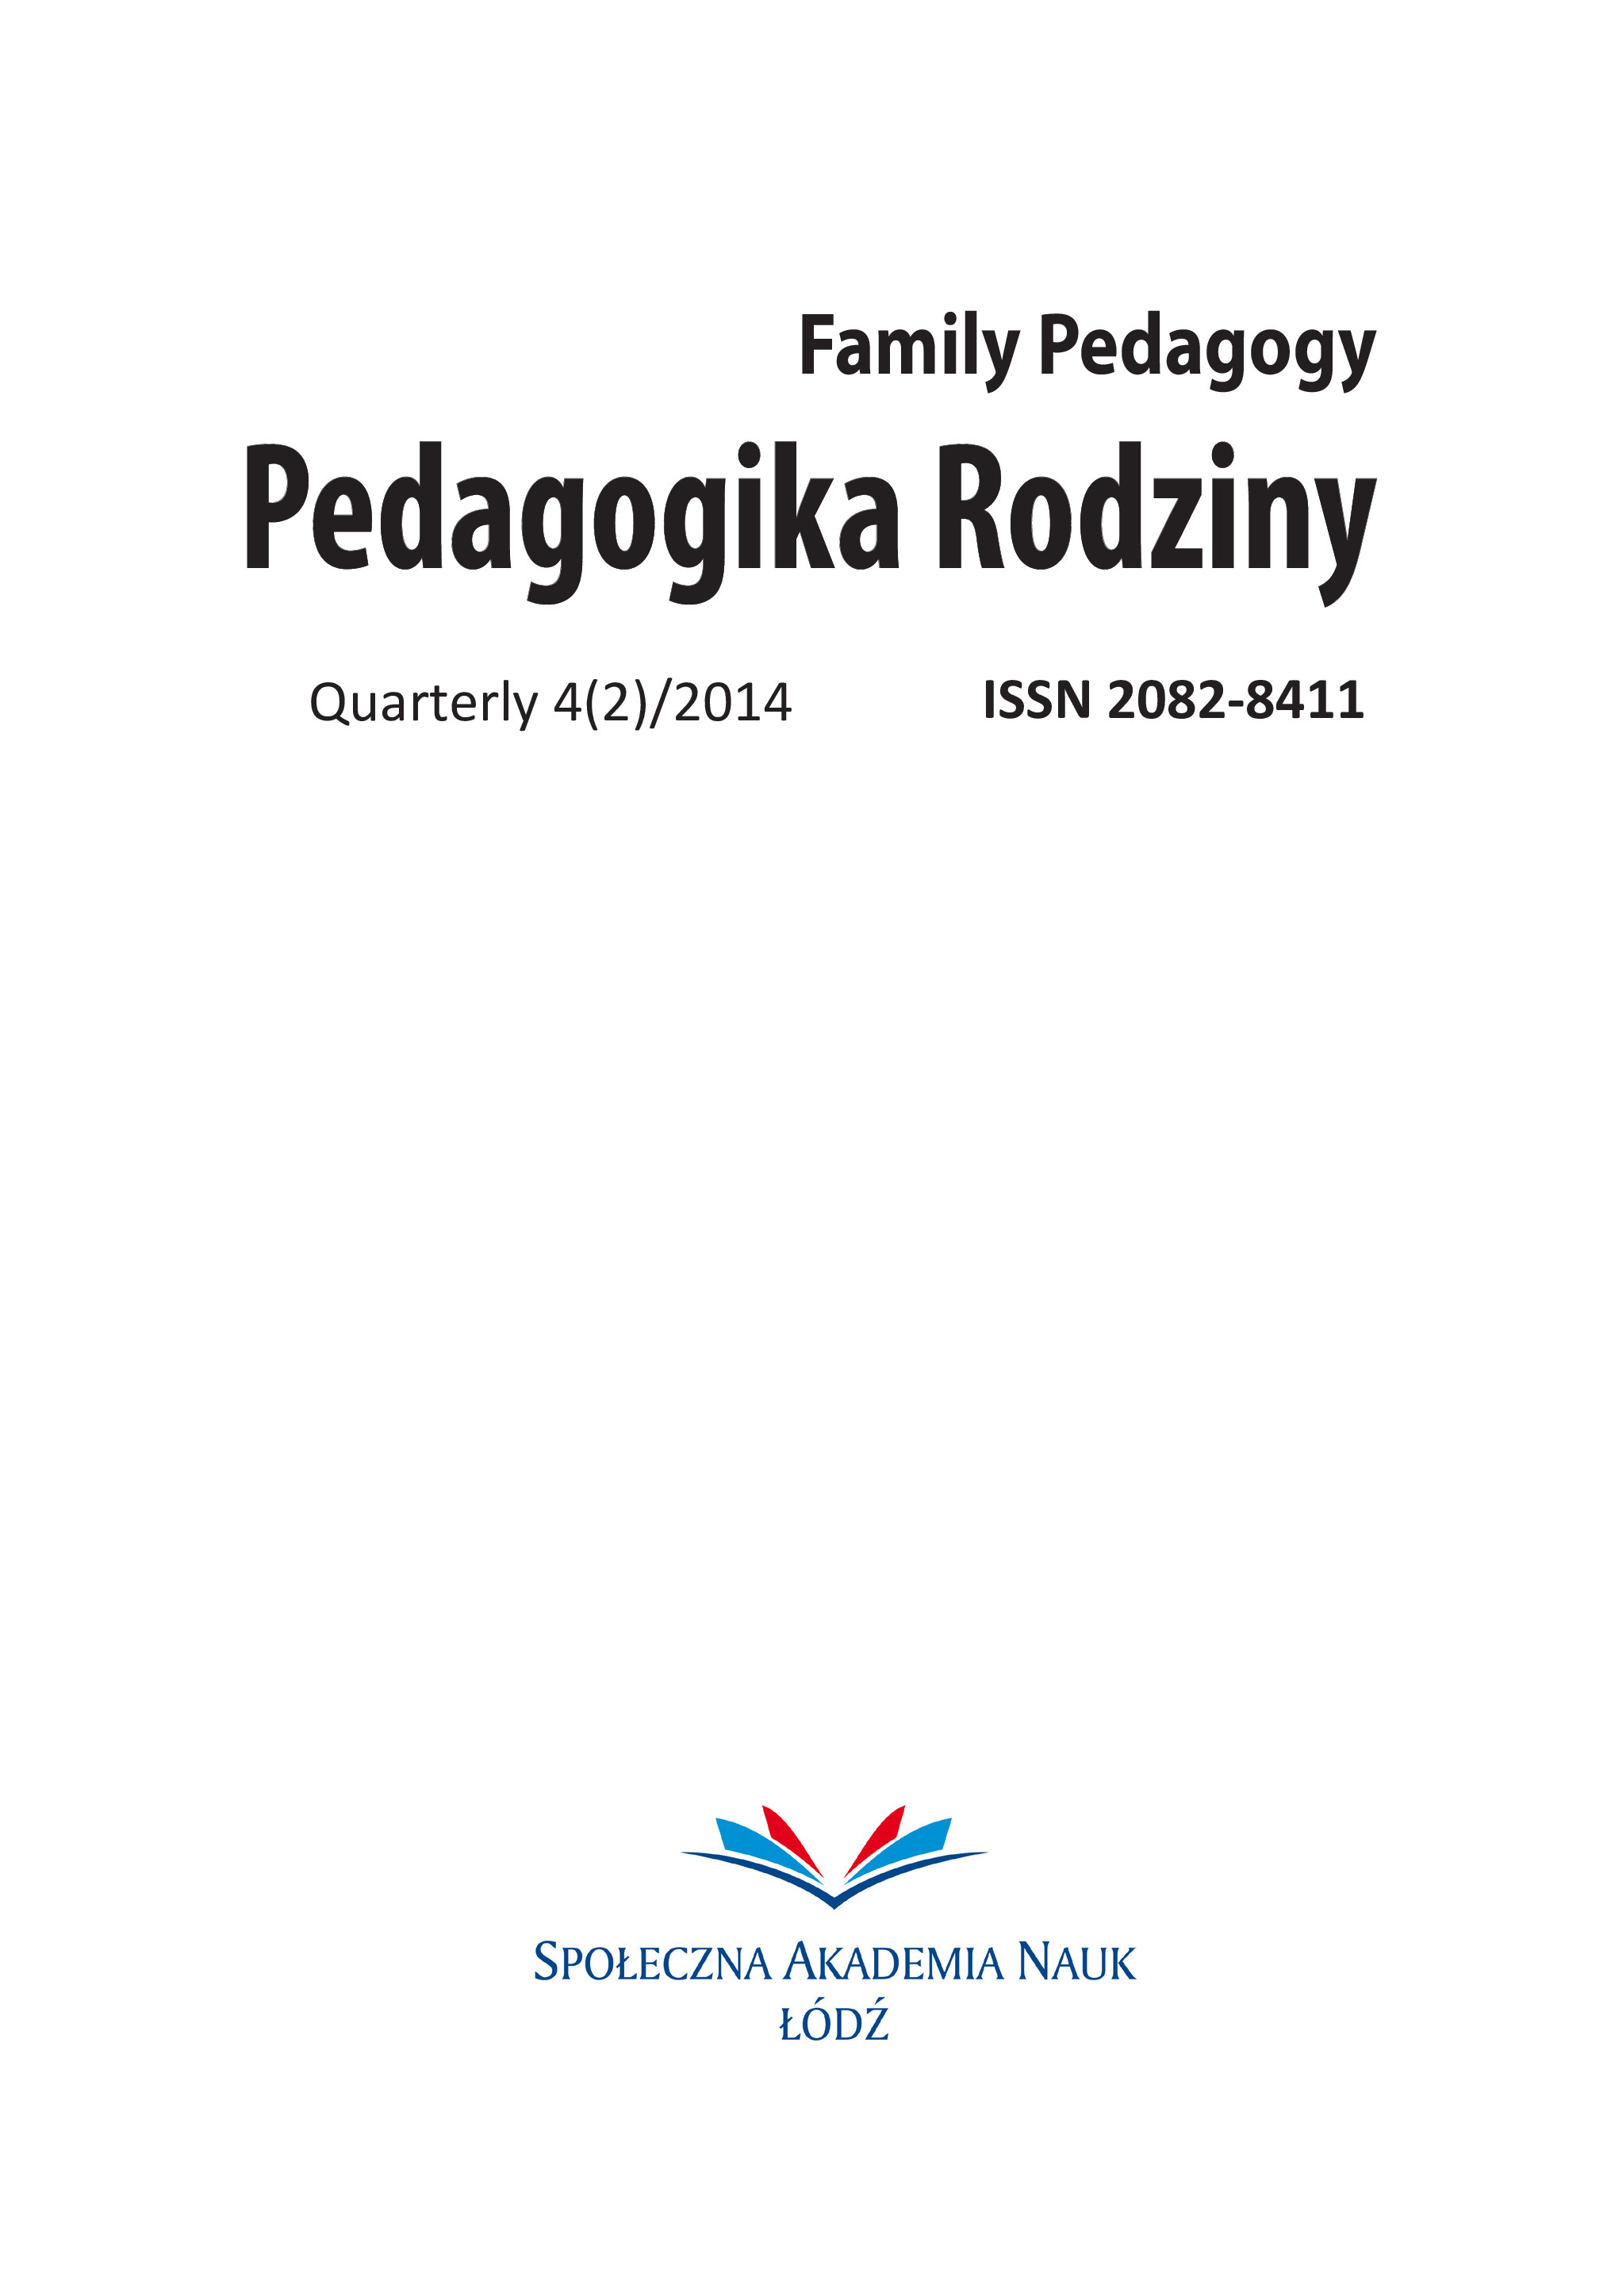 Raising a child in prearranged environment in the perception of Polish teachers – the forgotten discourse or a new educational perspective? (Research conducted in the province of Subcarpathian) Cover Image